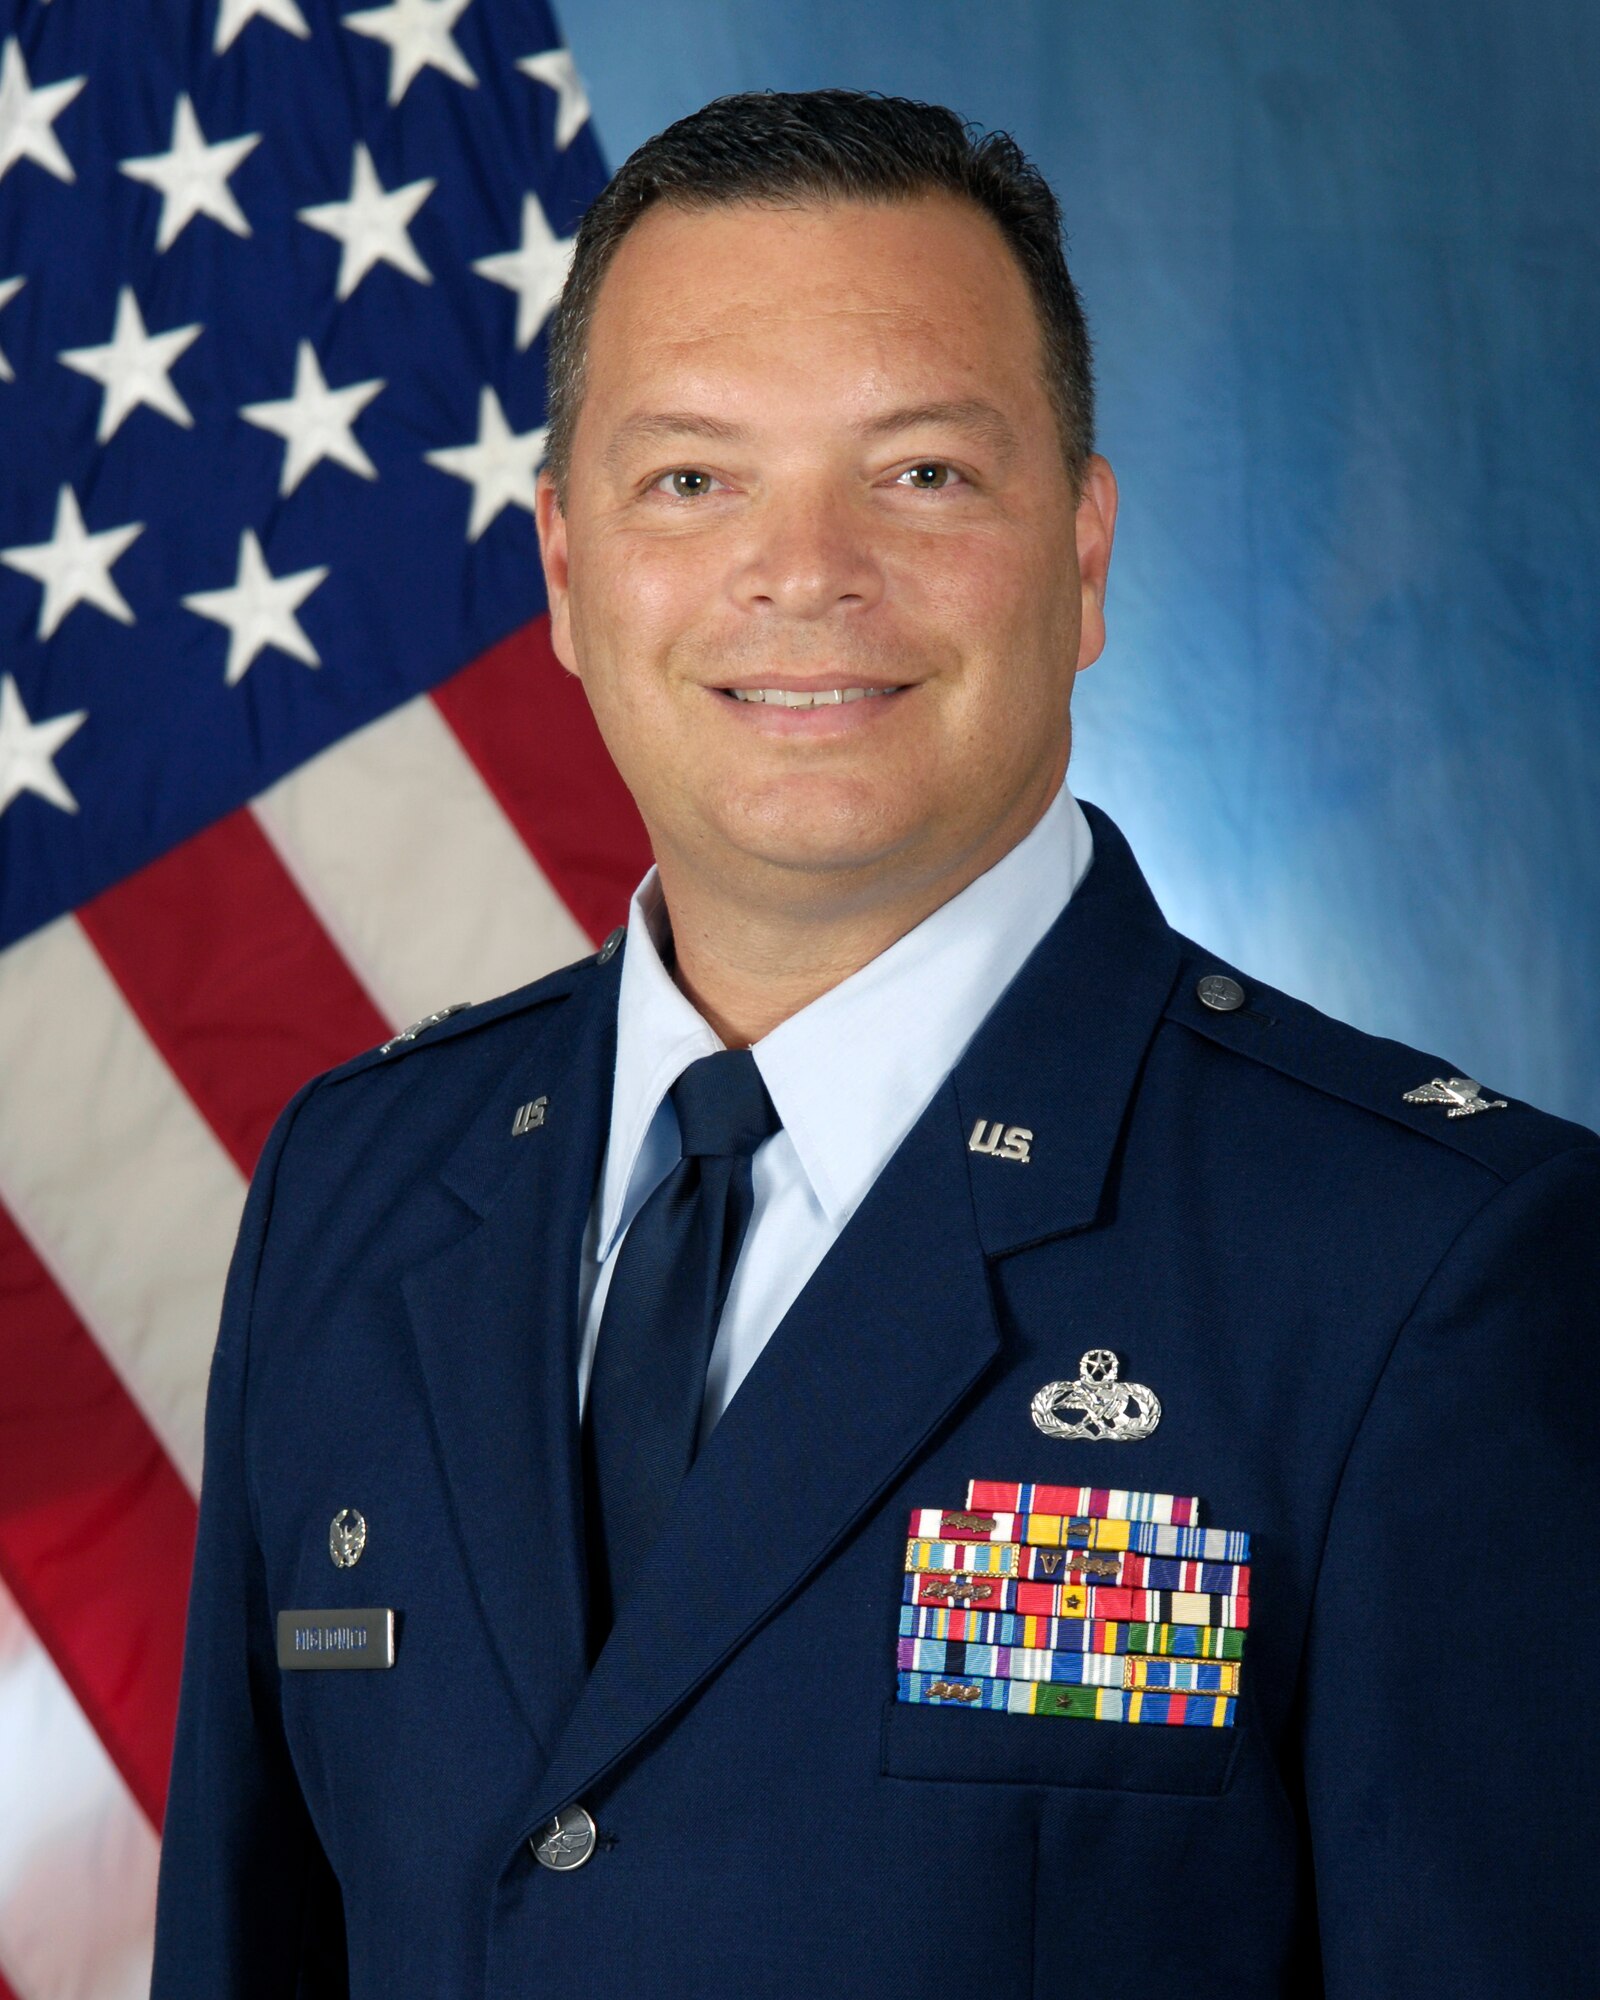 Col. Robert Miglionico became the 1st Special Operations Maintenance Group's new commander at Hurlburt Field, Fla., June 21, 2010. Colonel Miglionico comes to the 1st SOMXG from the Air War College at Maxwell Air Force Base, Ala. (U.S. Air Force photo)
